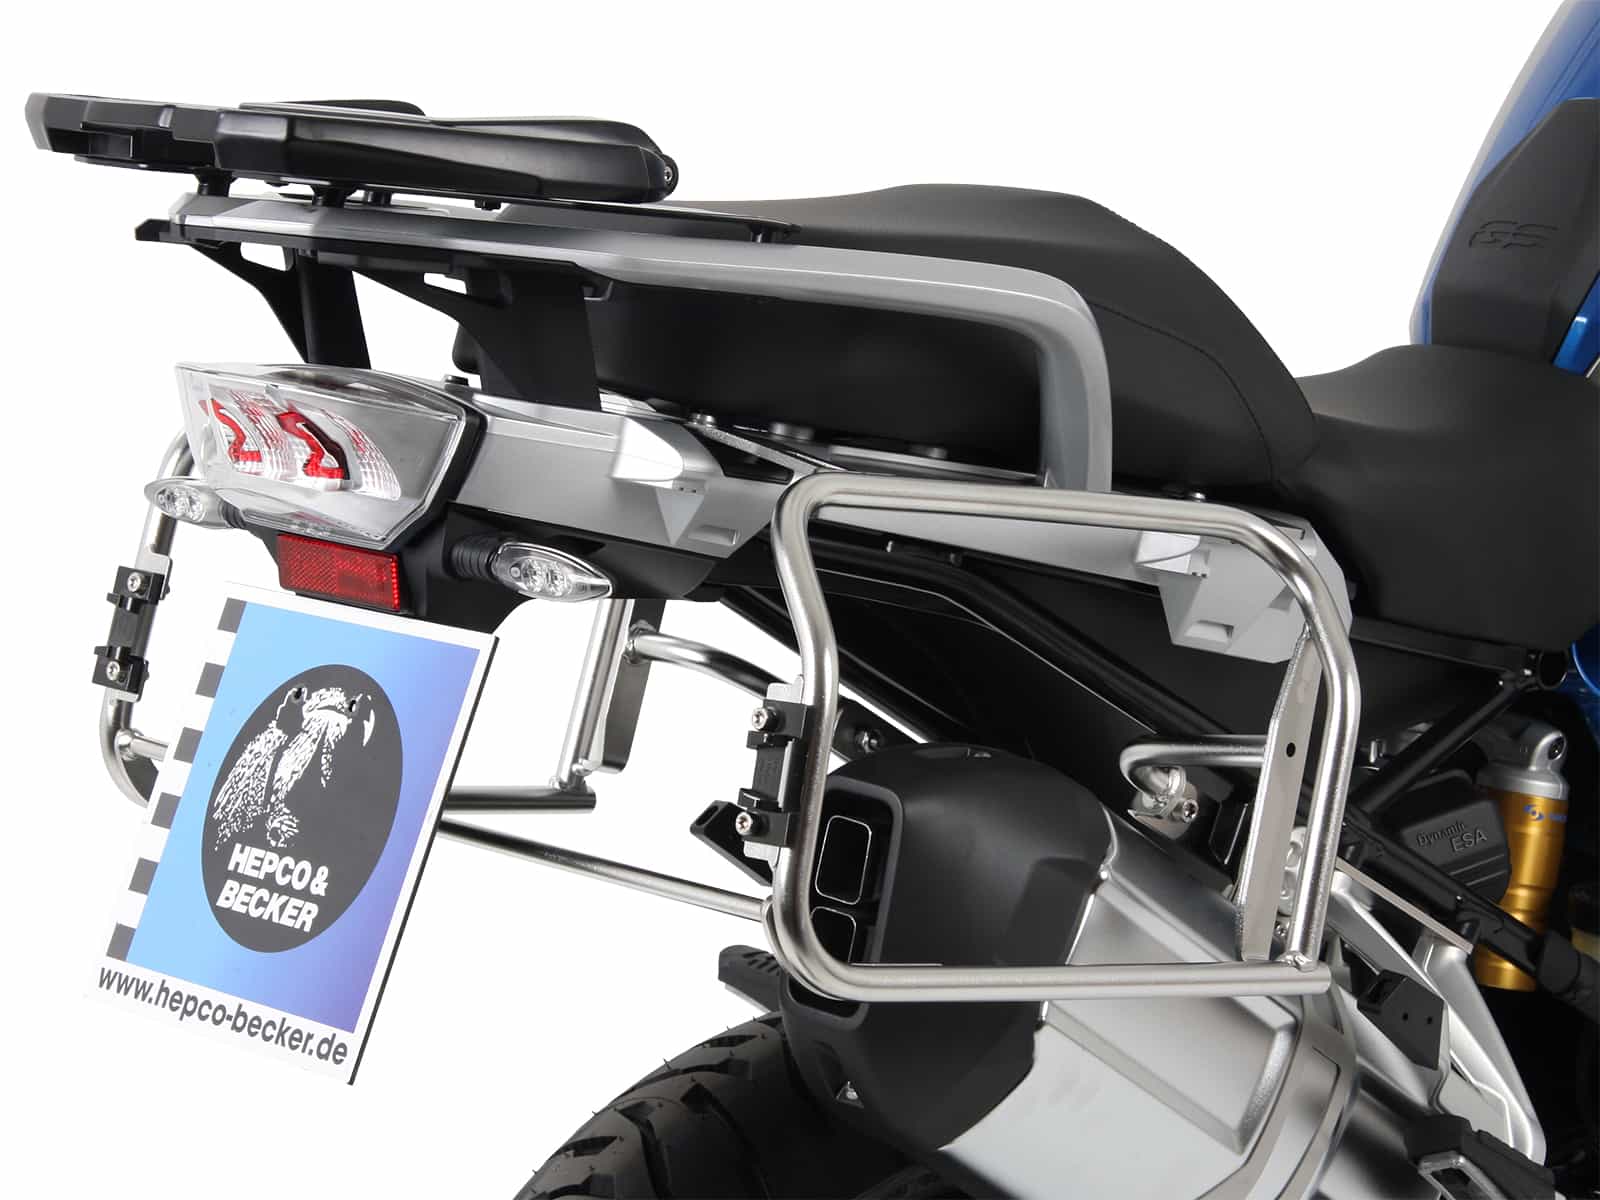 Sidecarrier Cutout stainless steel incl. Xplorer sideboxes silver for BMW R1200GS LC (2013-)